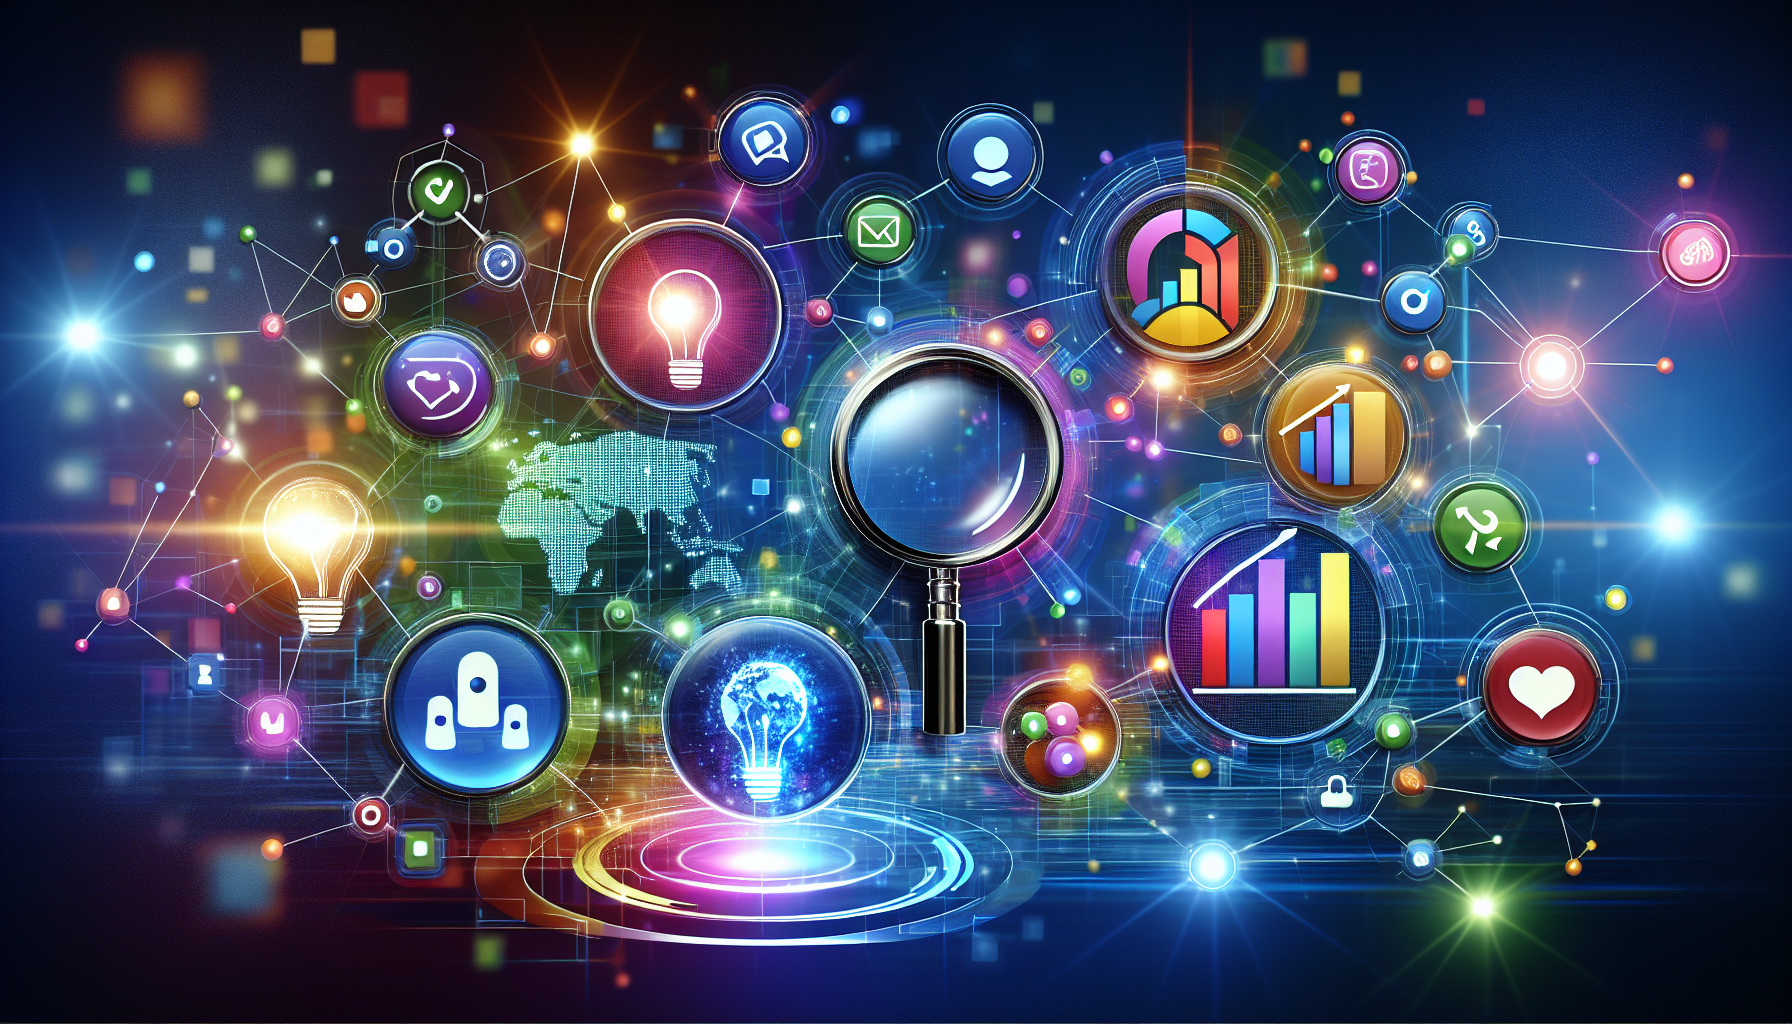 Digital marketing tools and technology icons representing brand building solutions